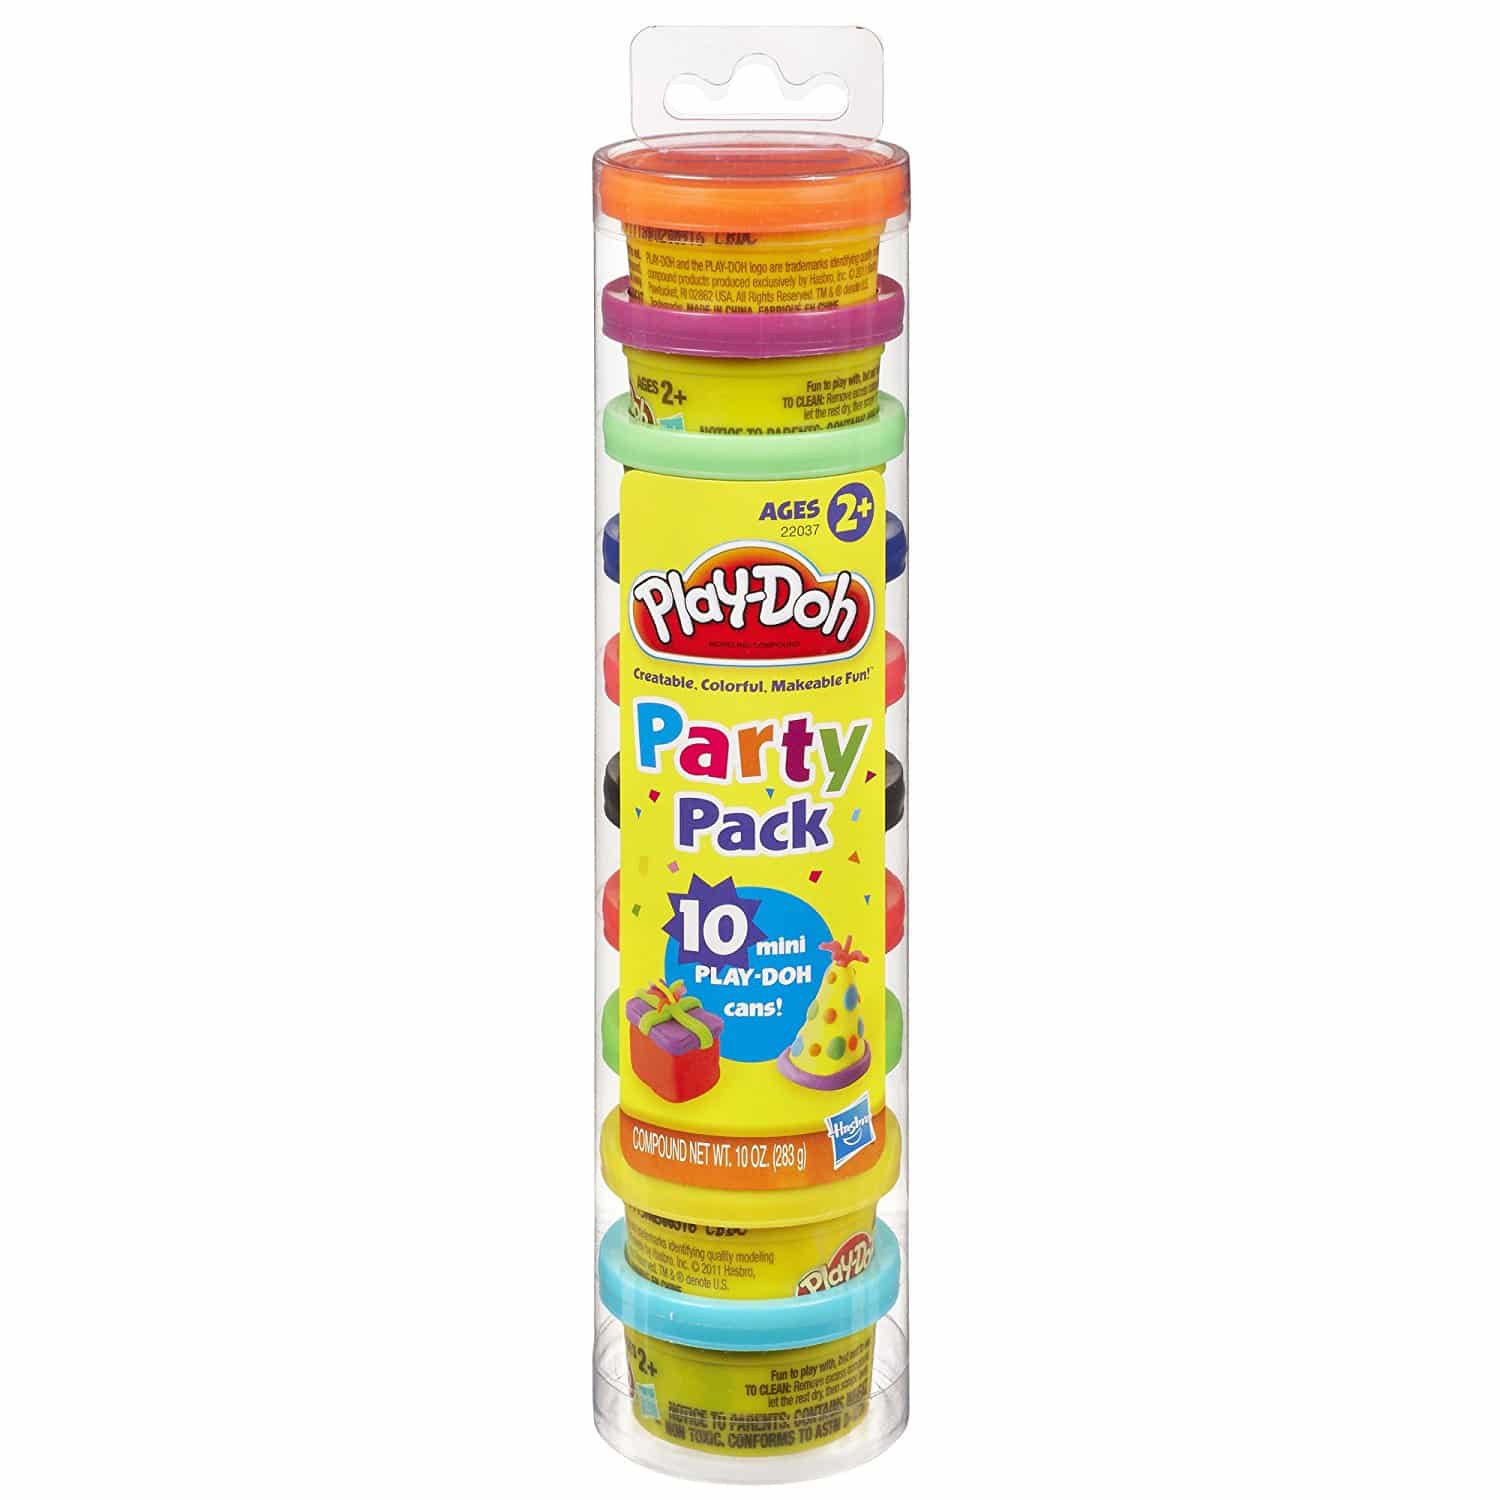 DEAL ALERT: Stocking Stuffer Alert!!  Play-Doh Party Pack is 38% off!